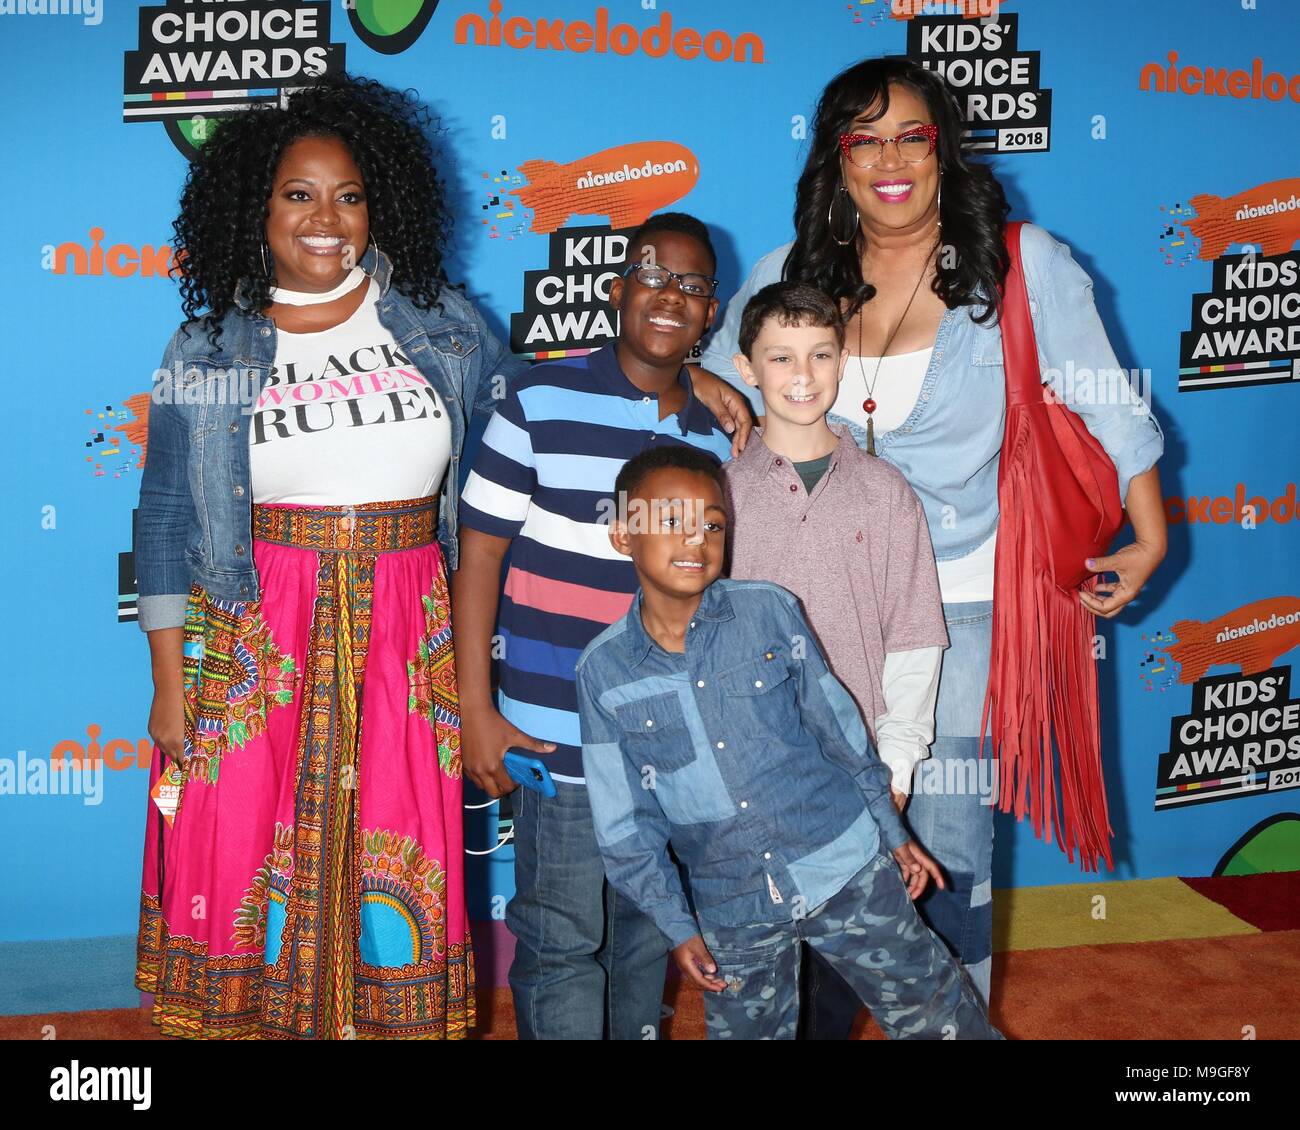 Inglewood, CA. 24th Mar, 2018. Sherri Shepherd, Jeffrey Tarpley, Guest, Joshua Kaleb Whitley, Kym Whitley at arrivals for Nickelodeon's 2018 Kids' Choice Awards - Part 2, The Forum, Inglewood, CA March 24, 2018. Credit: Priscilla Grant/Everett Collection/Alamy Live News Stock Photo